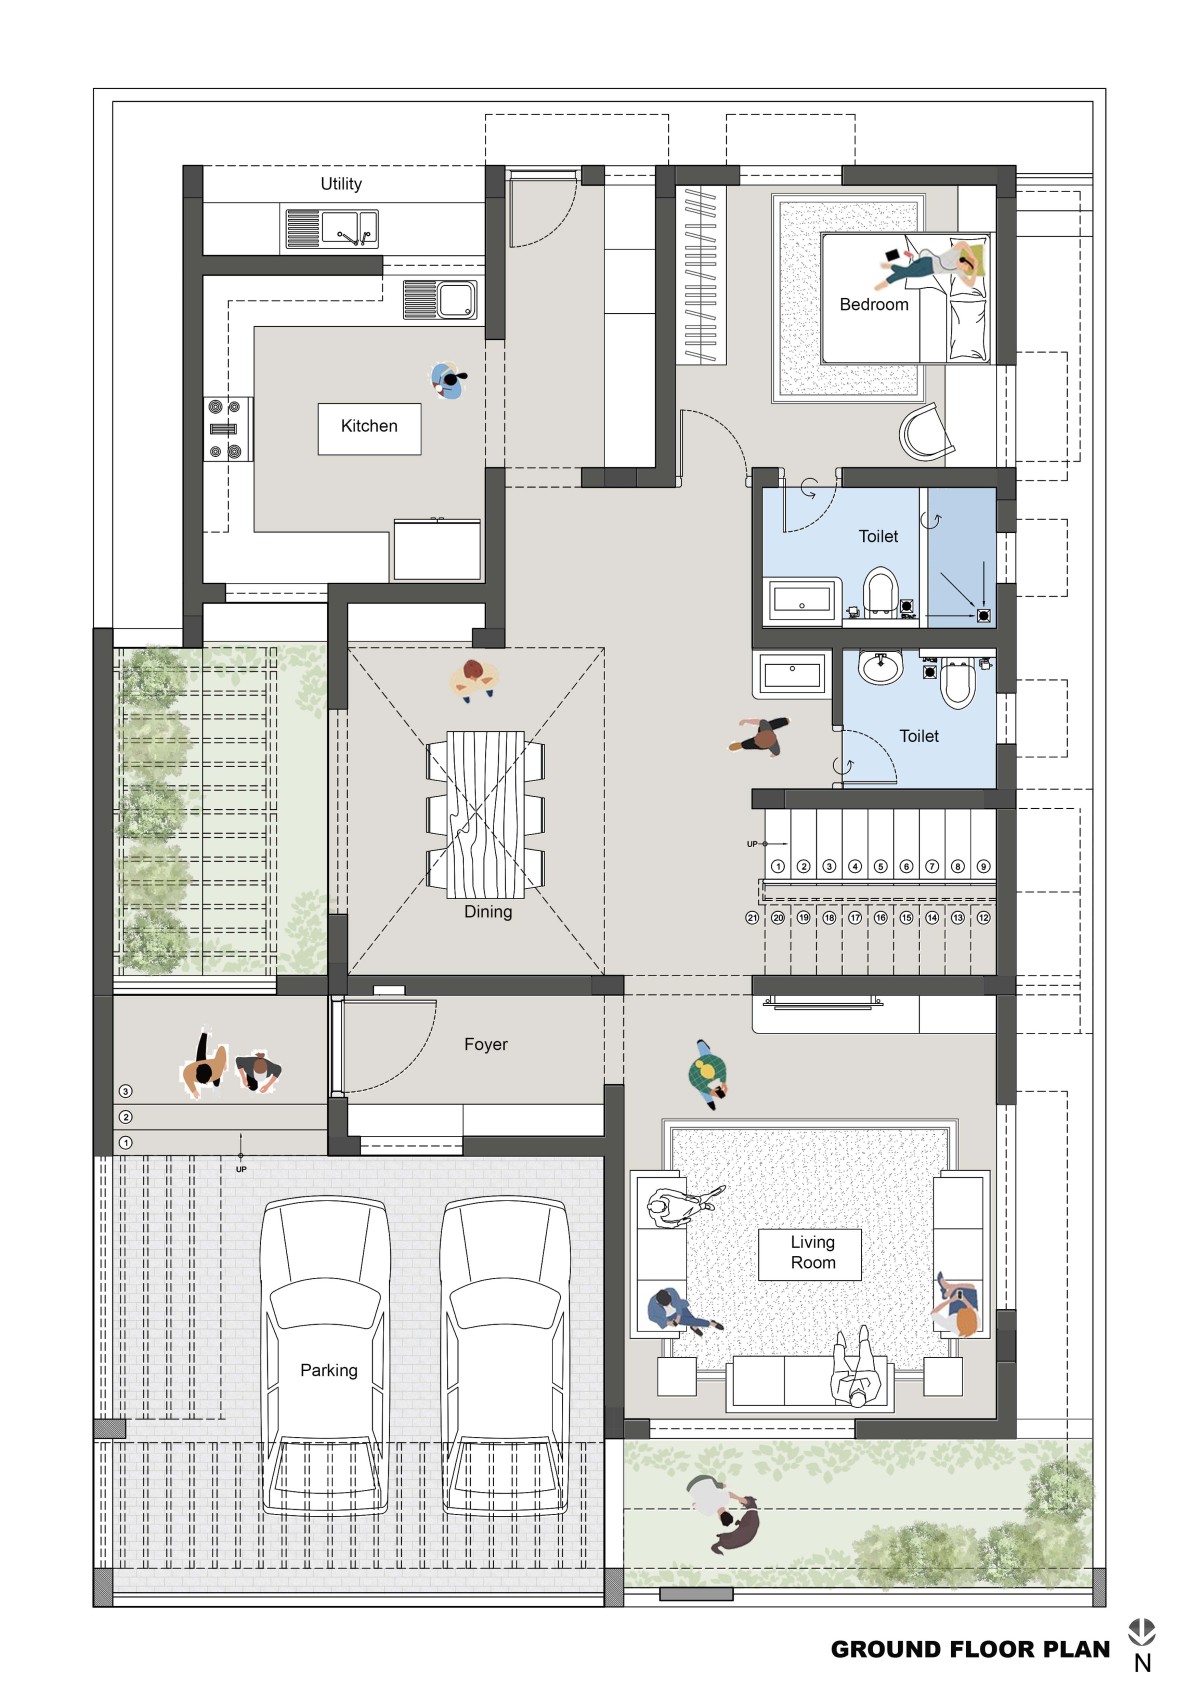 Ground floor plan of Falak Residence by Space